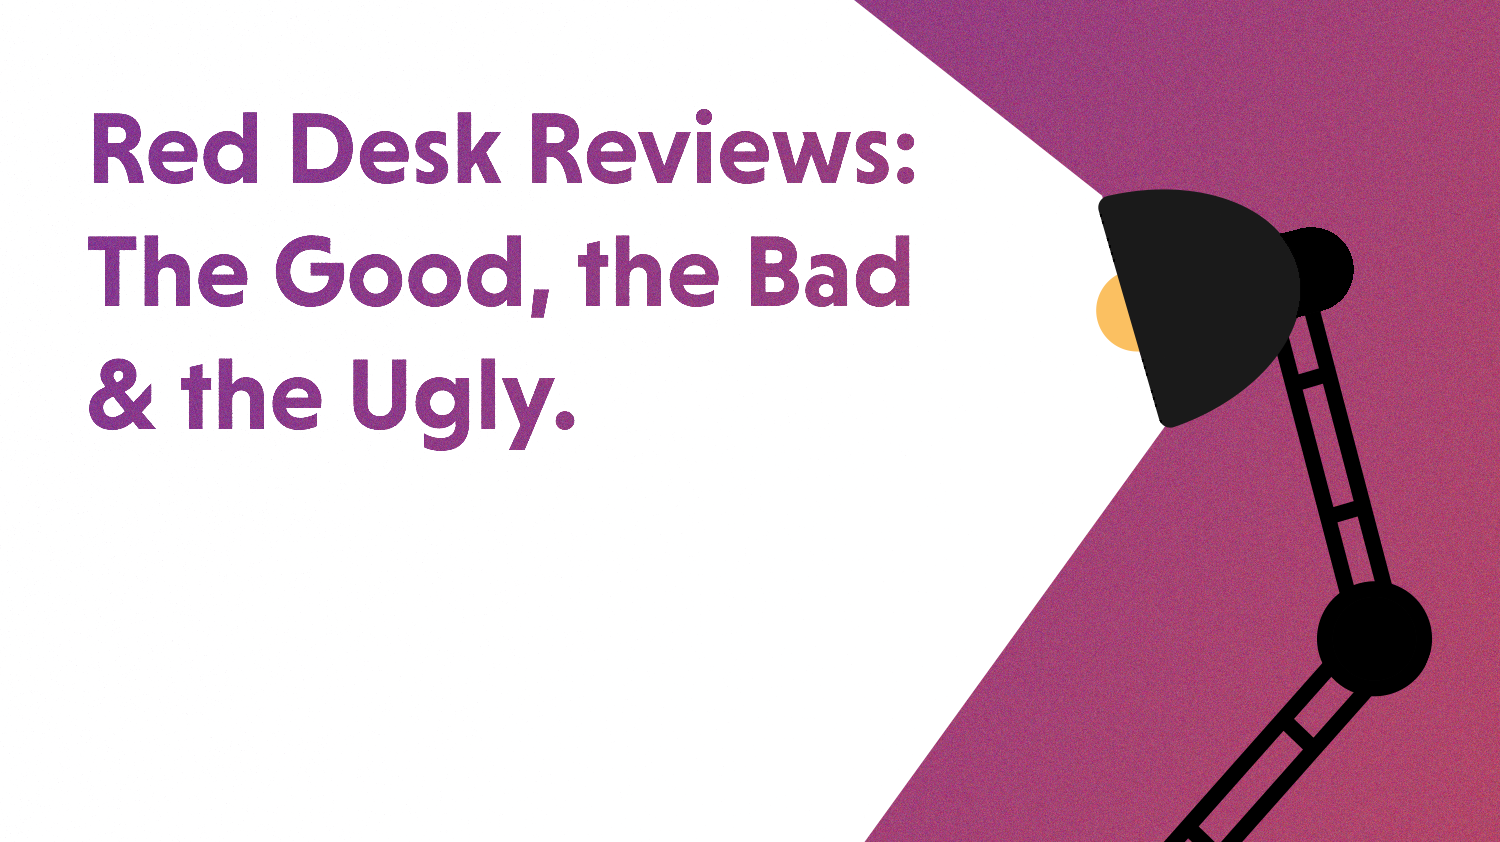 Red Desk Reviews: The Good, the Bad, and the Ugly